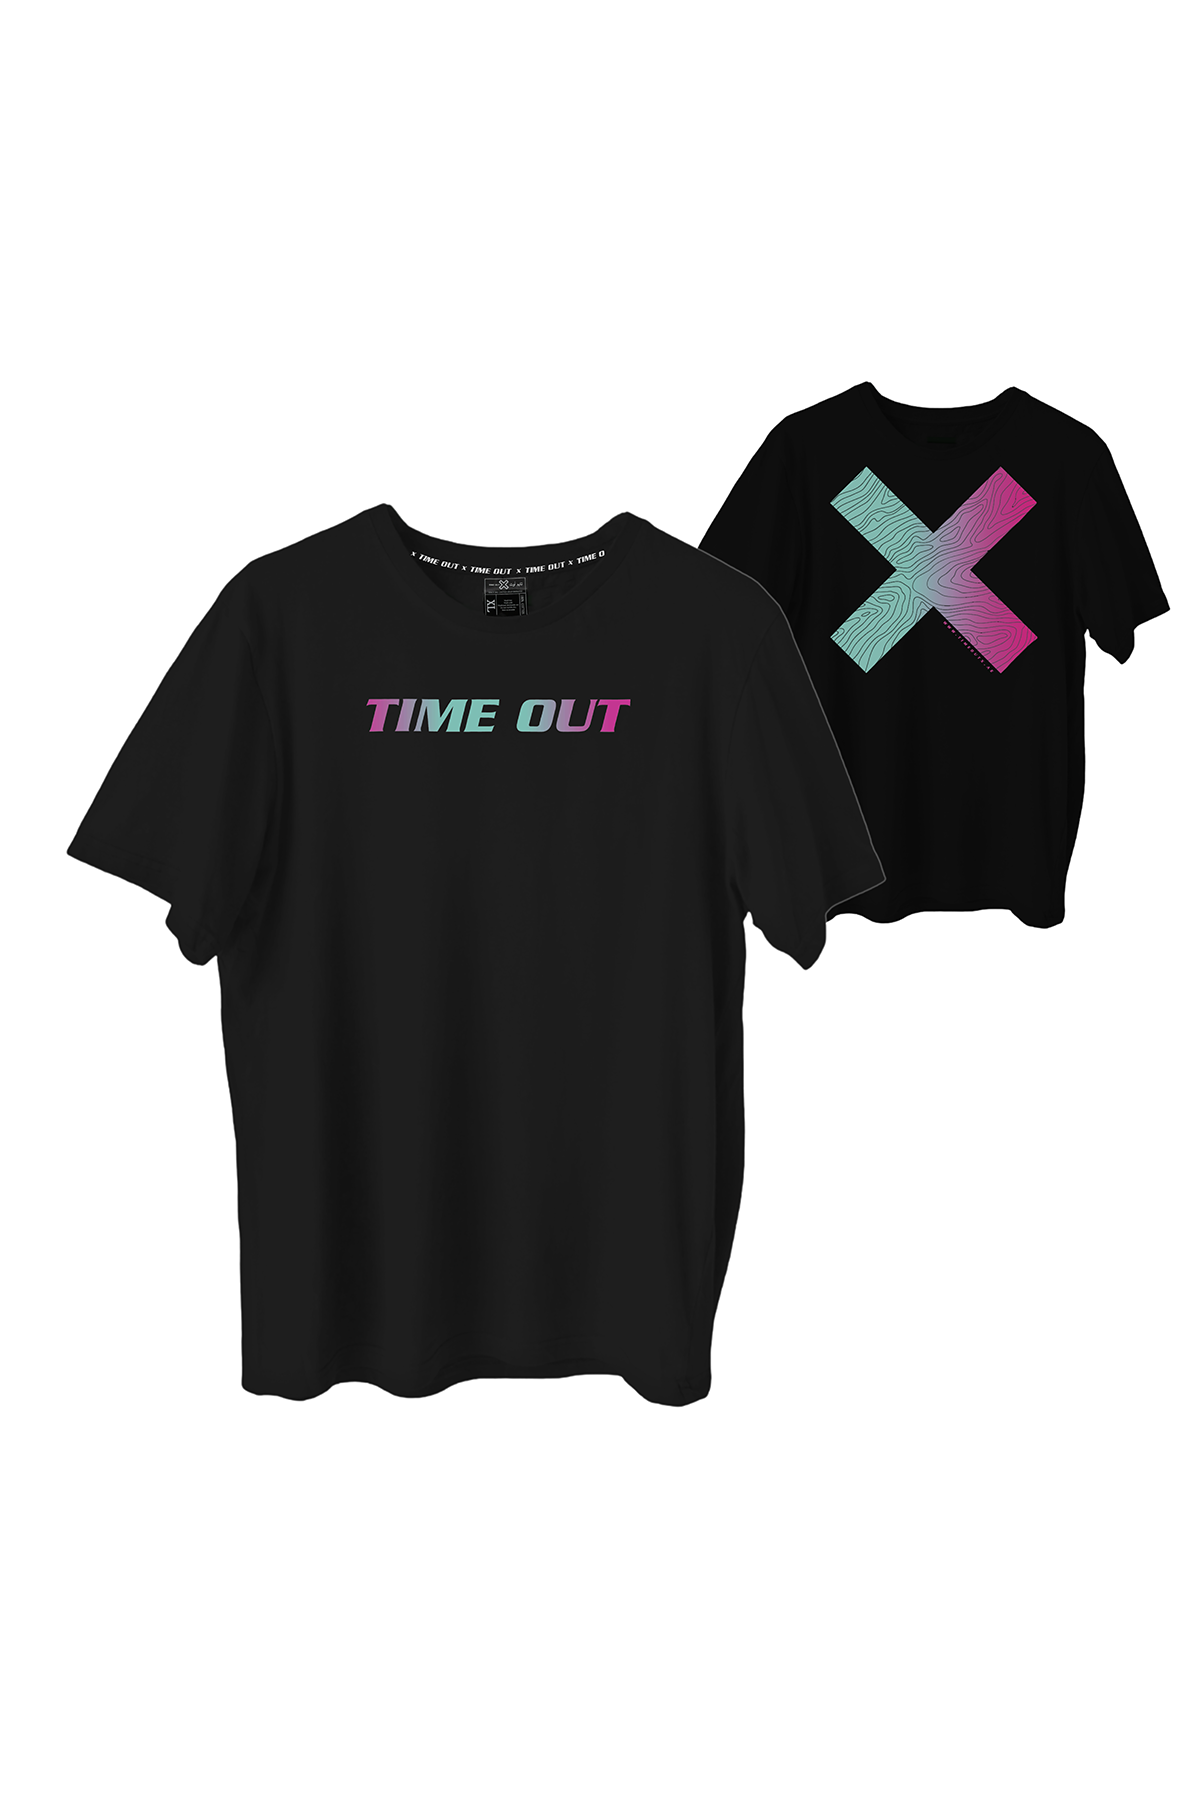 Time-Out-X-Signature-Large-X-Colored-Graphics-T-Shirt—Black—Front-and-Back